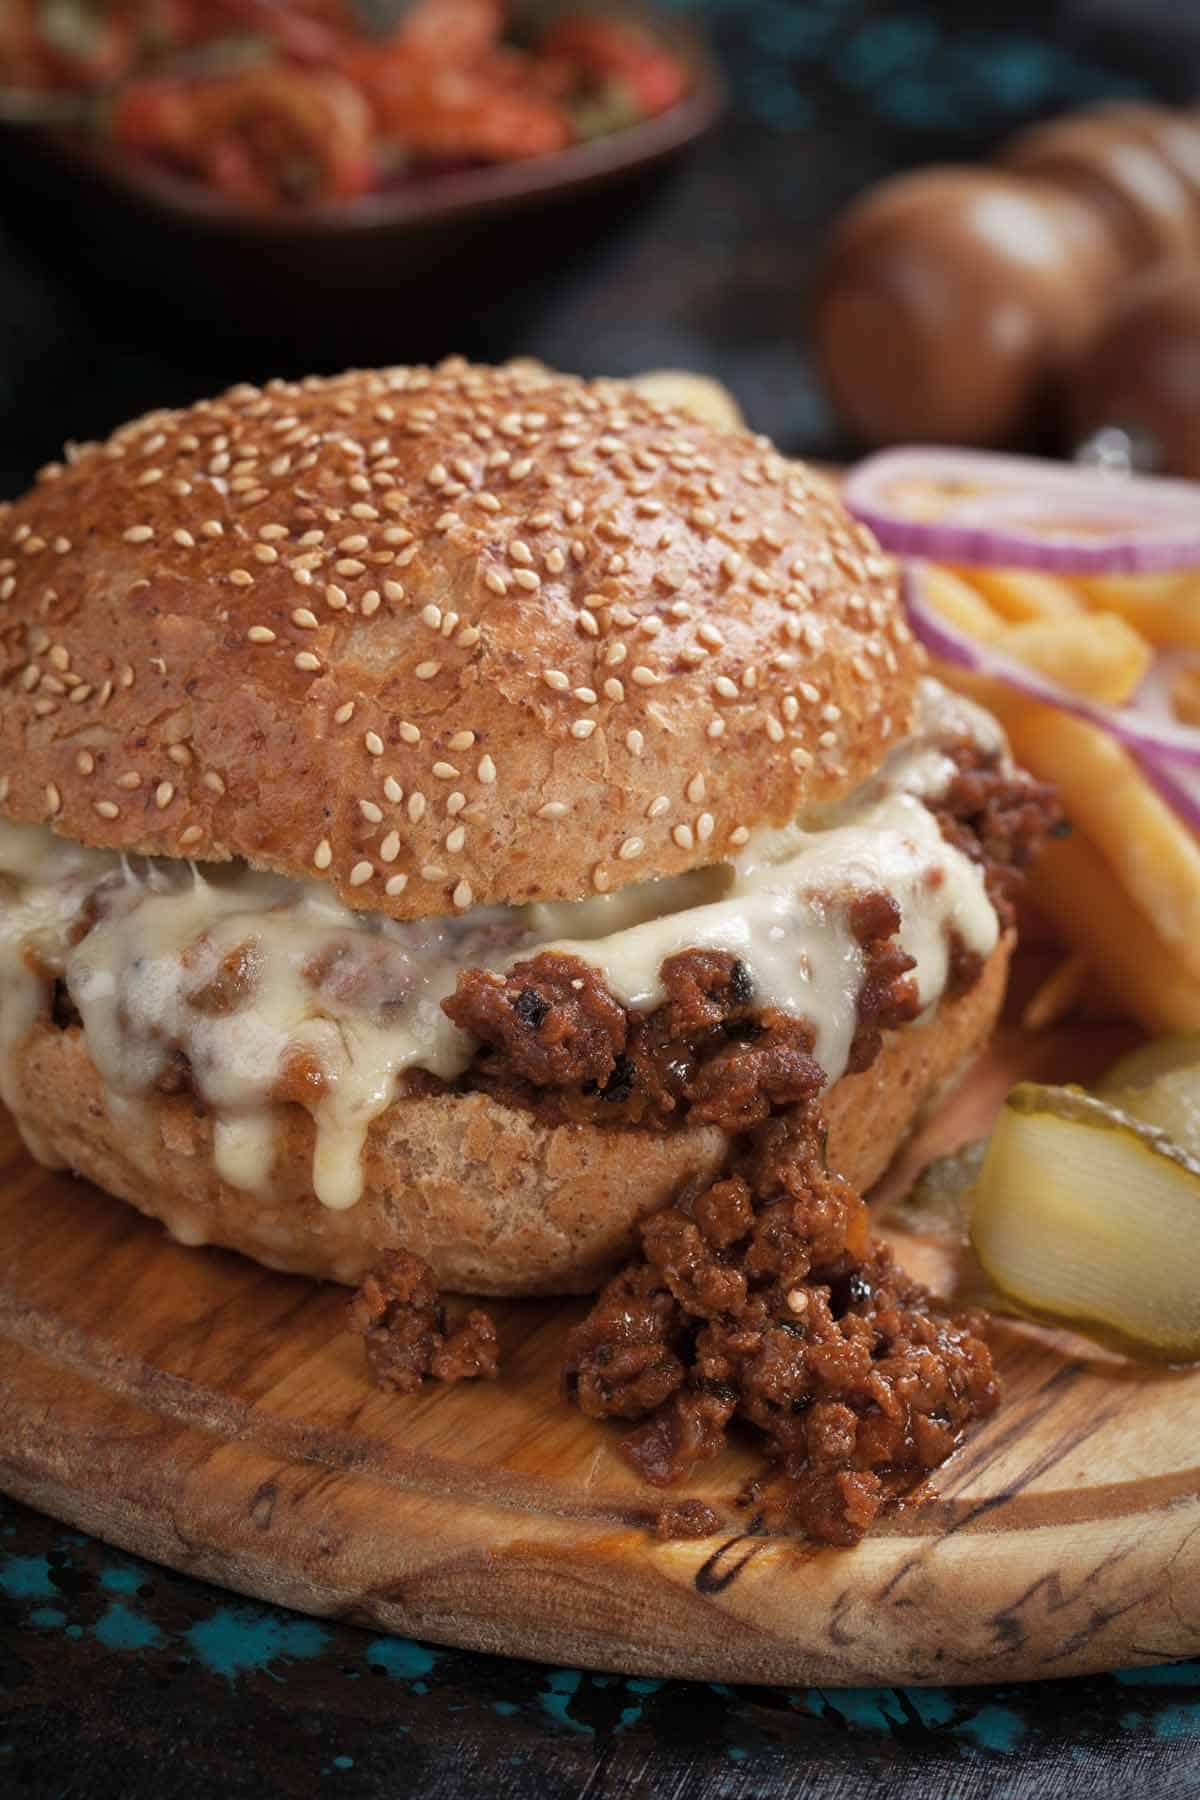 Sloppy joes sandwich with cheese on a sesame seed bun.